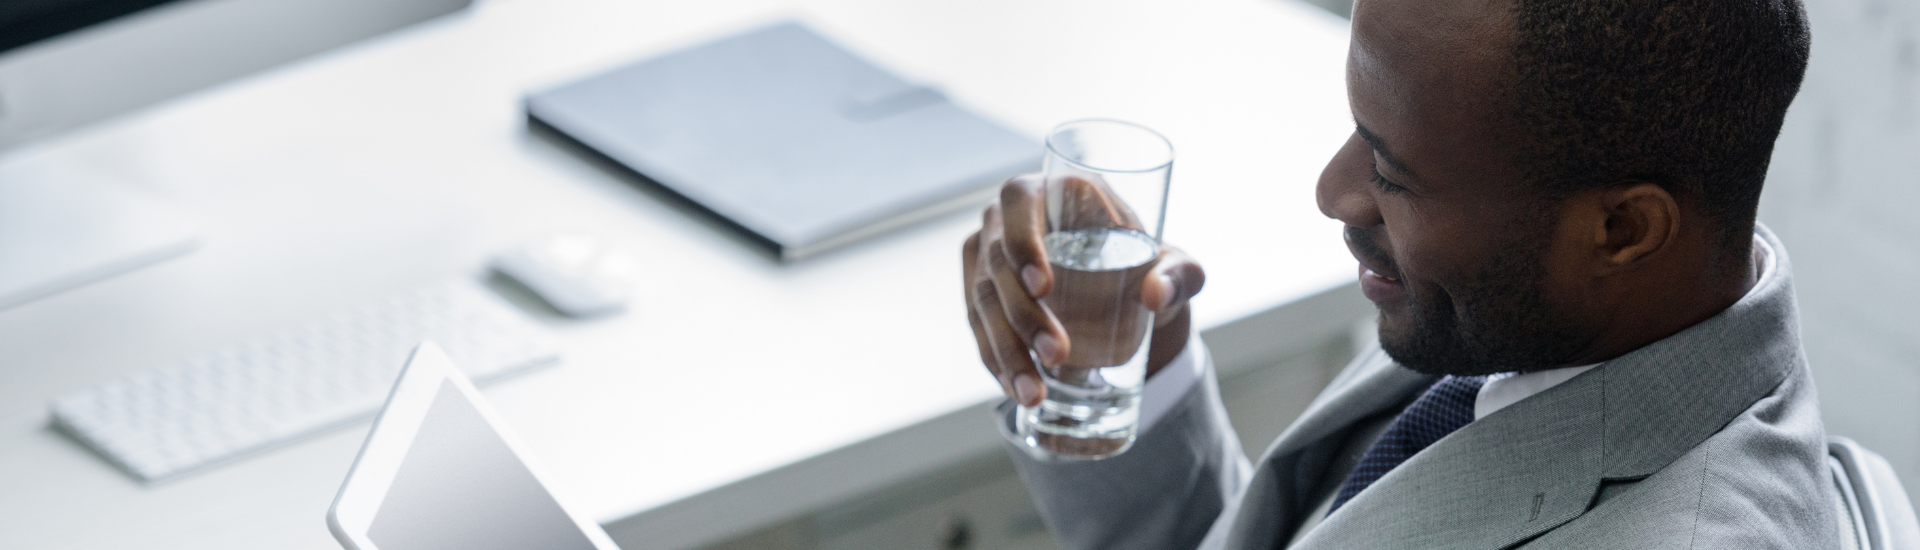 man in suit drinking glass of water